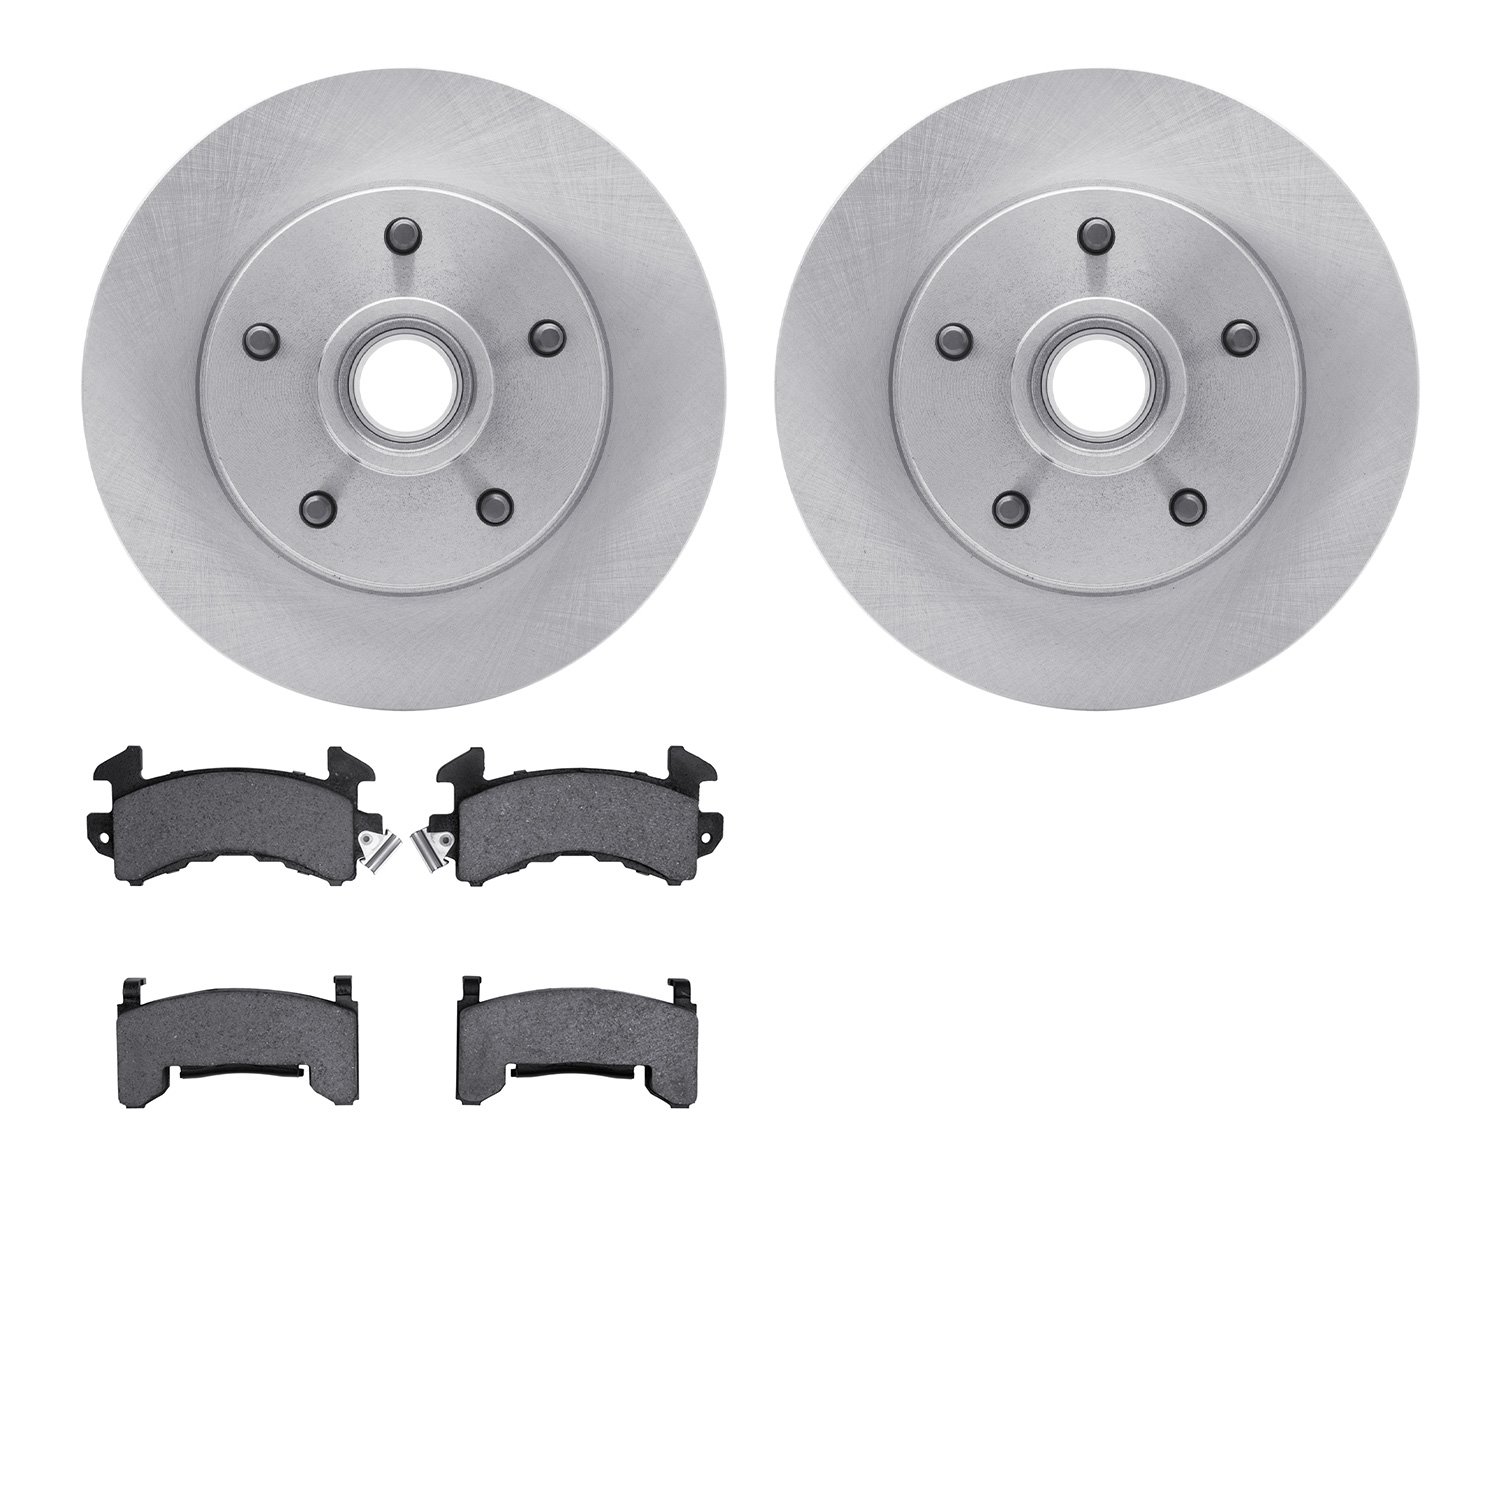 6402-47010 Brake Rotors with Ultimate-Duty Brake Pads, 1978-1978 GM, Position: Front